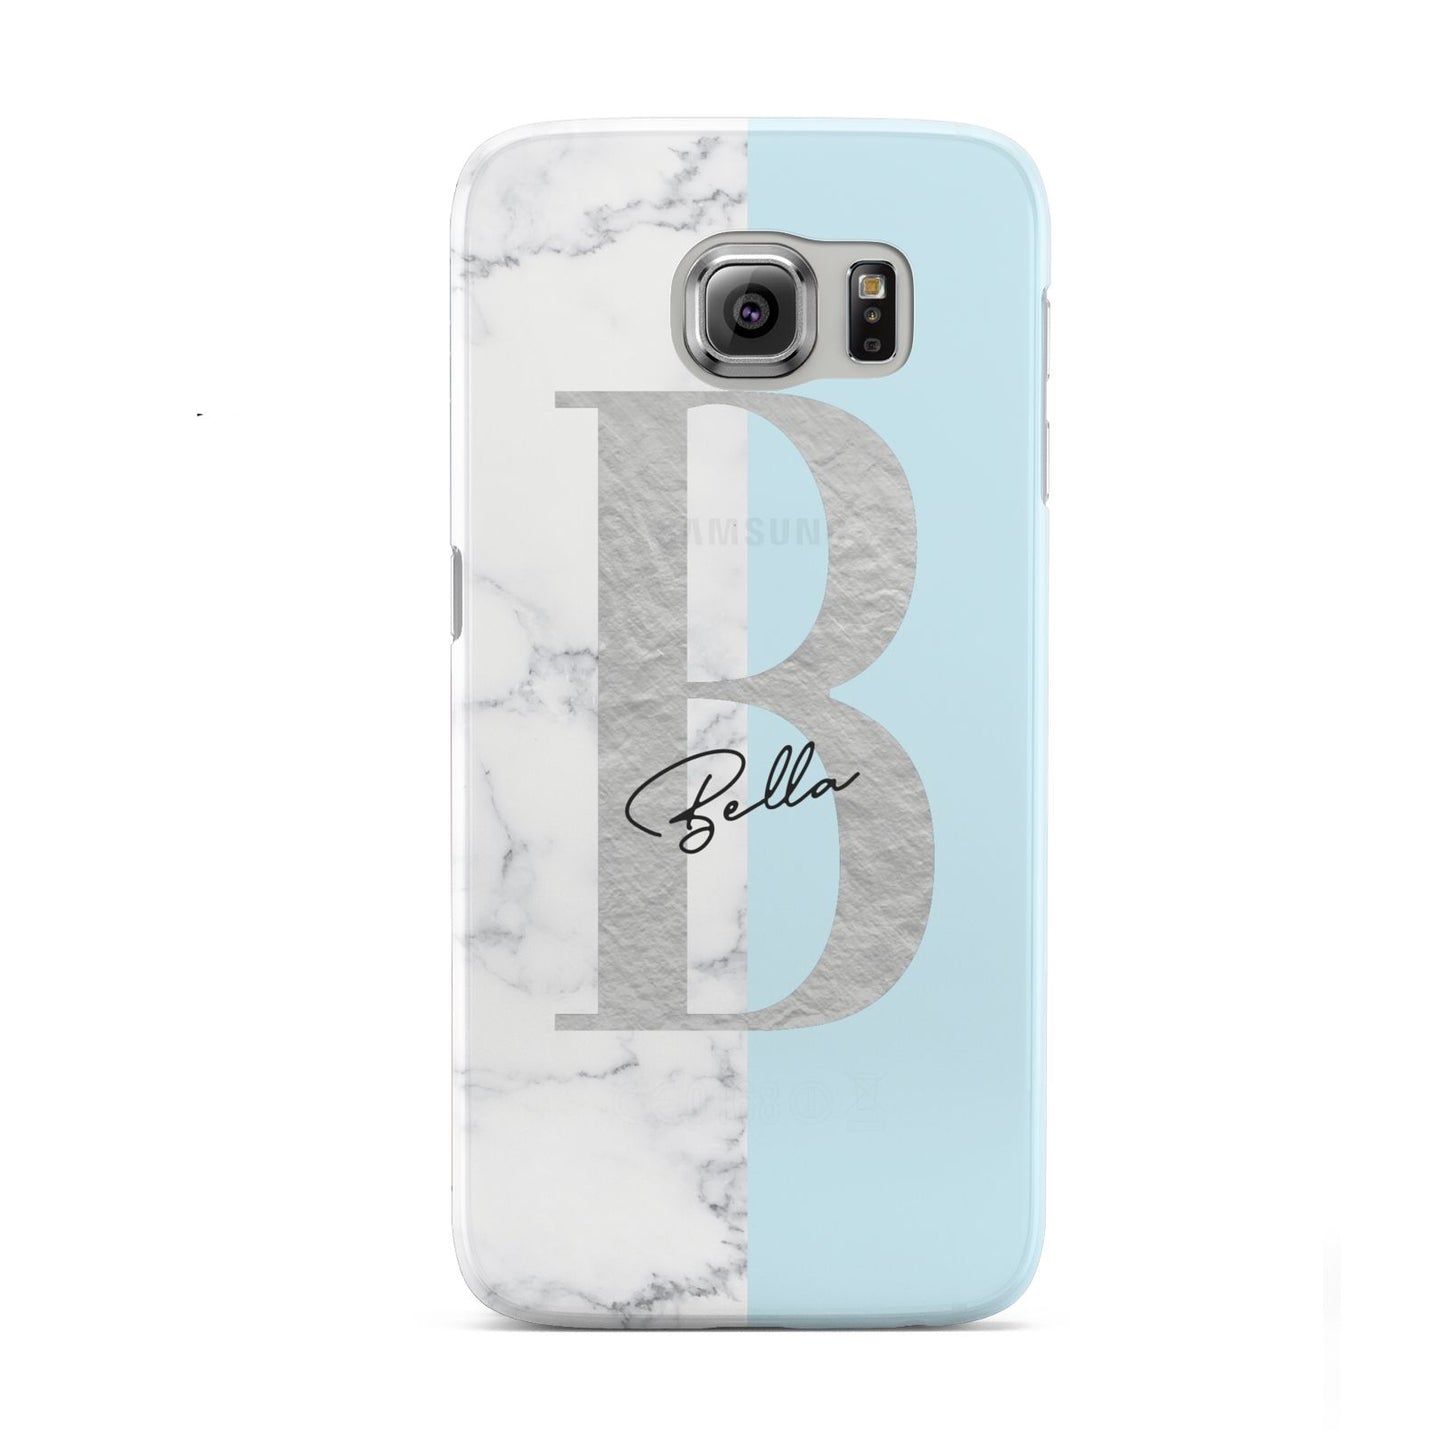 Personalised Chrome Marble Samsung Galaxy S6 Case